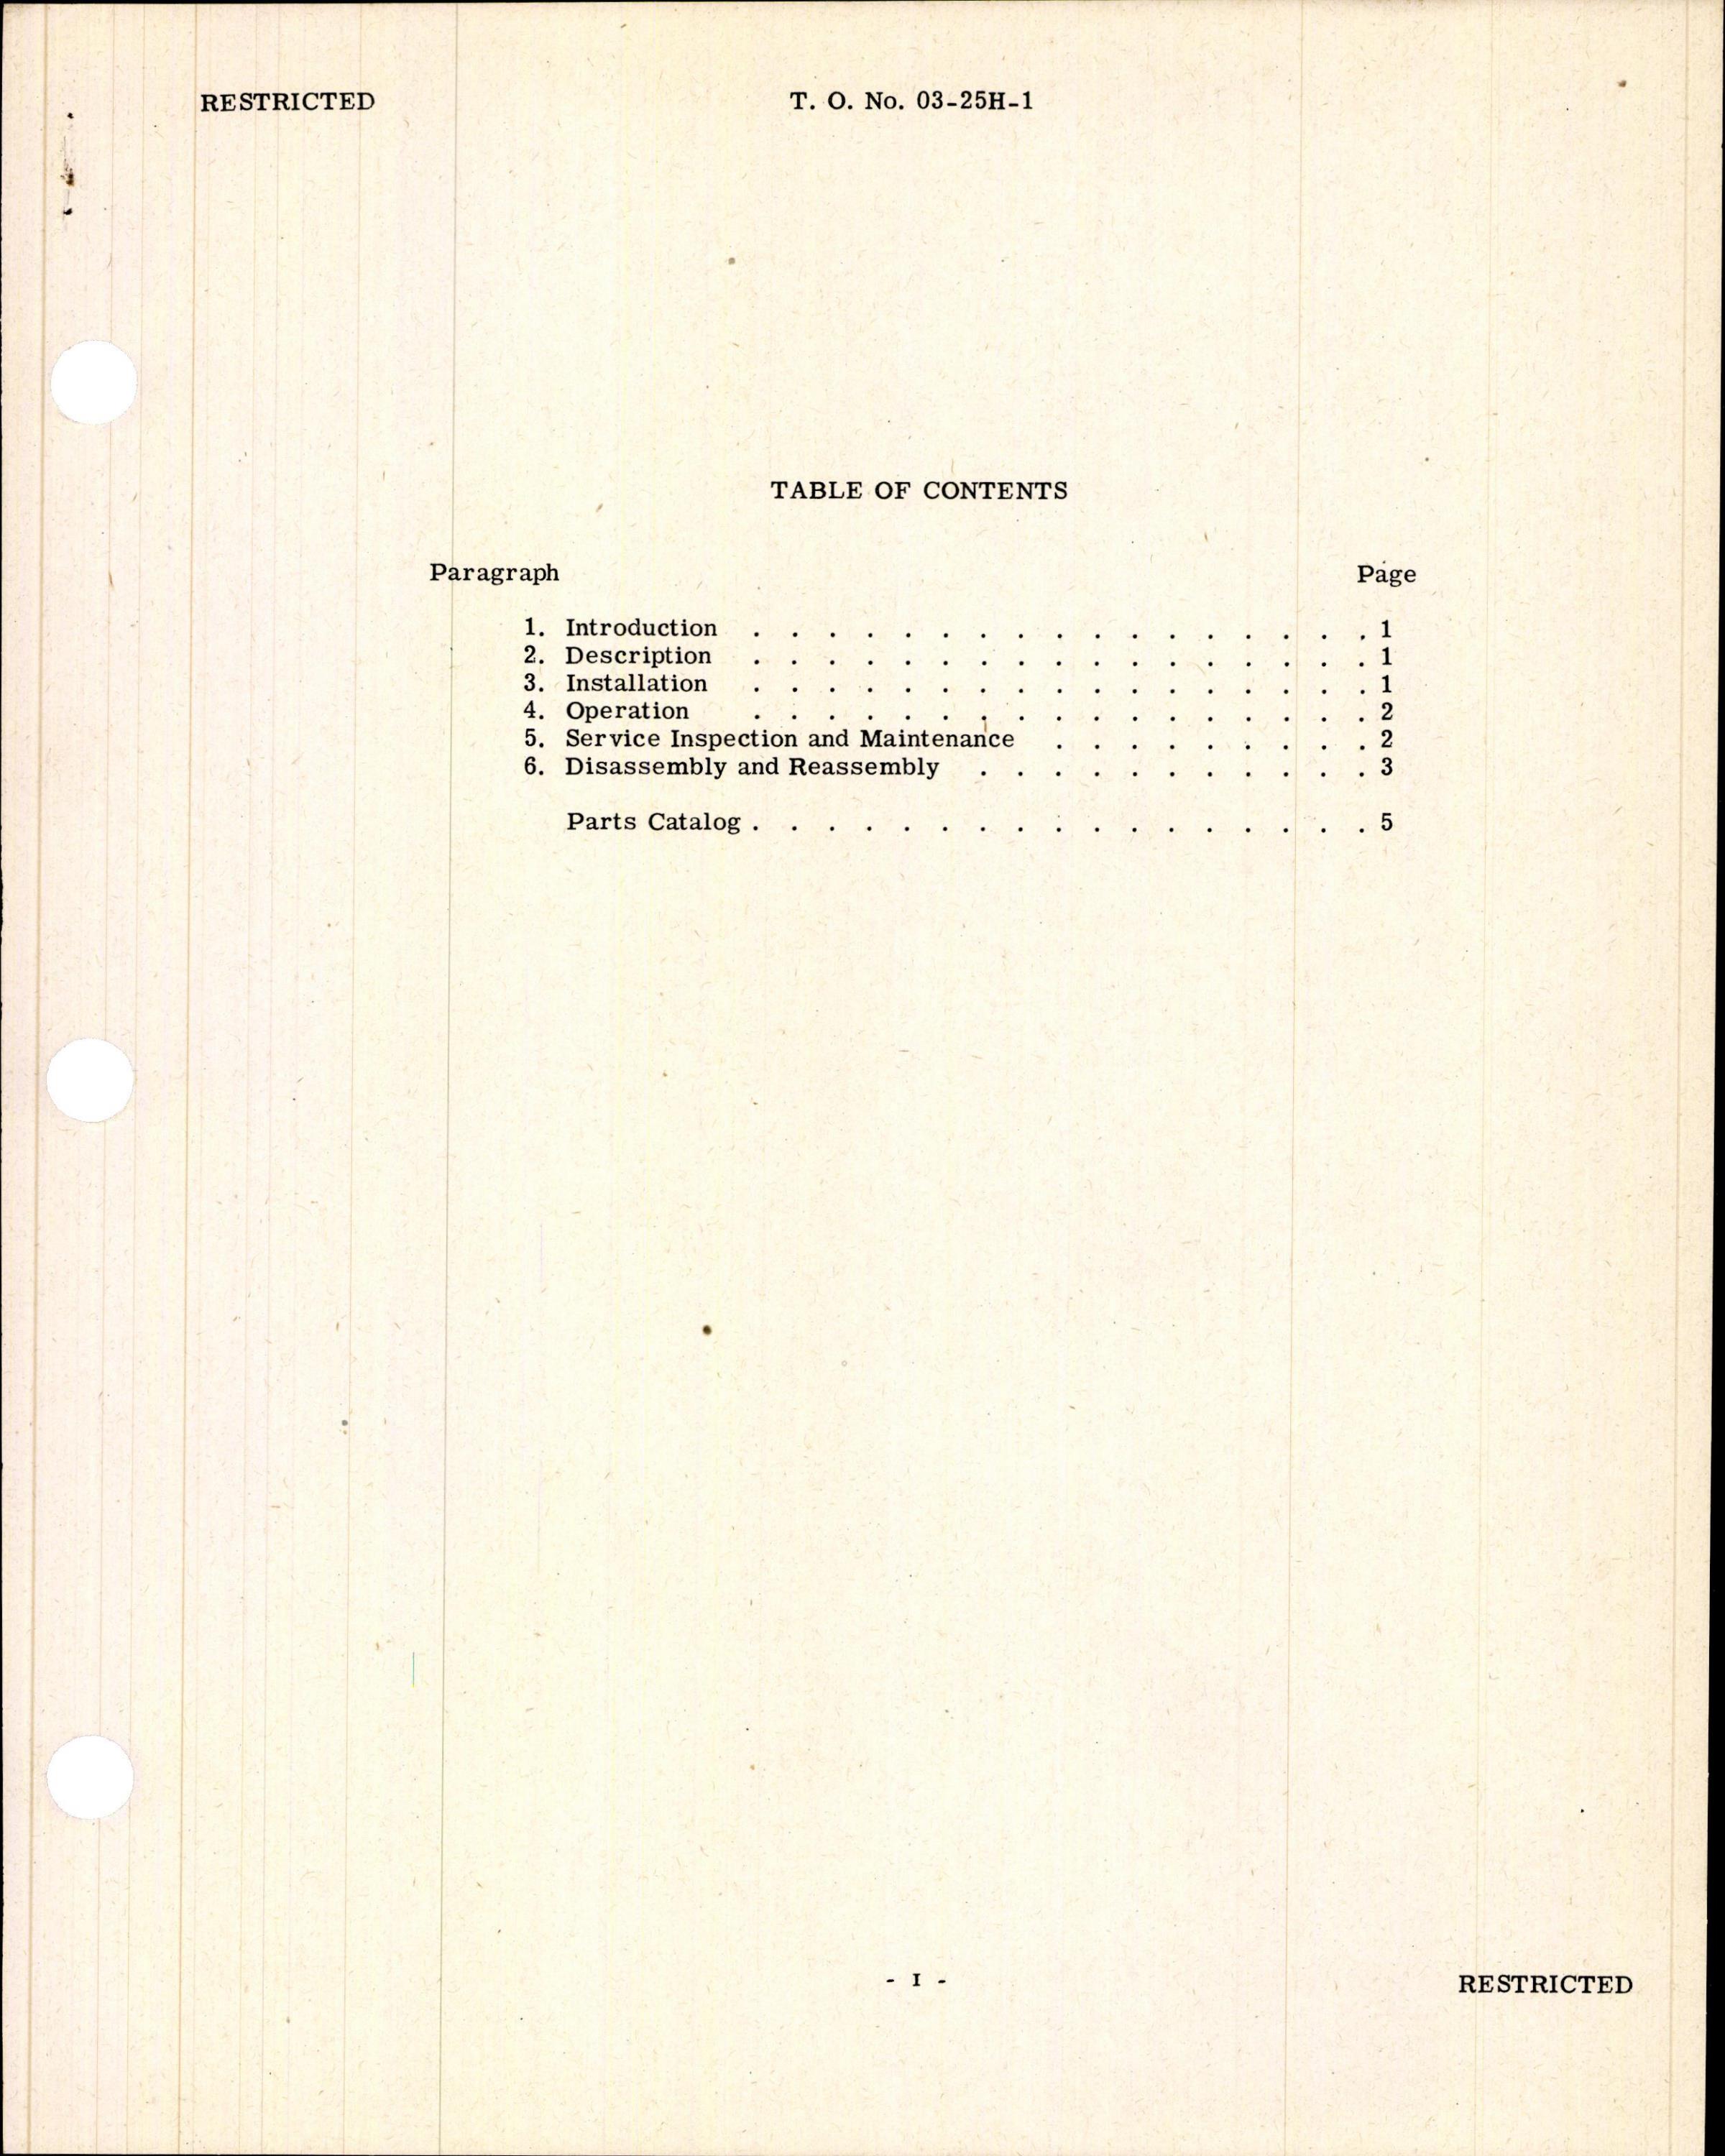 Sample page 3 from AirCorps Library document: Handbook of Instructions with Parts Catalog for Model MC100 Hydraulic Master Cylinder